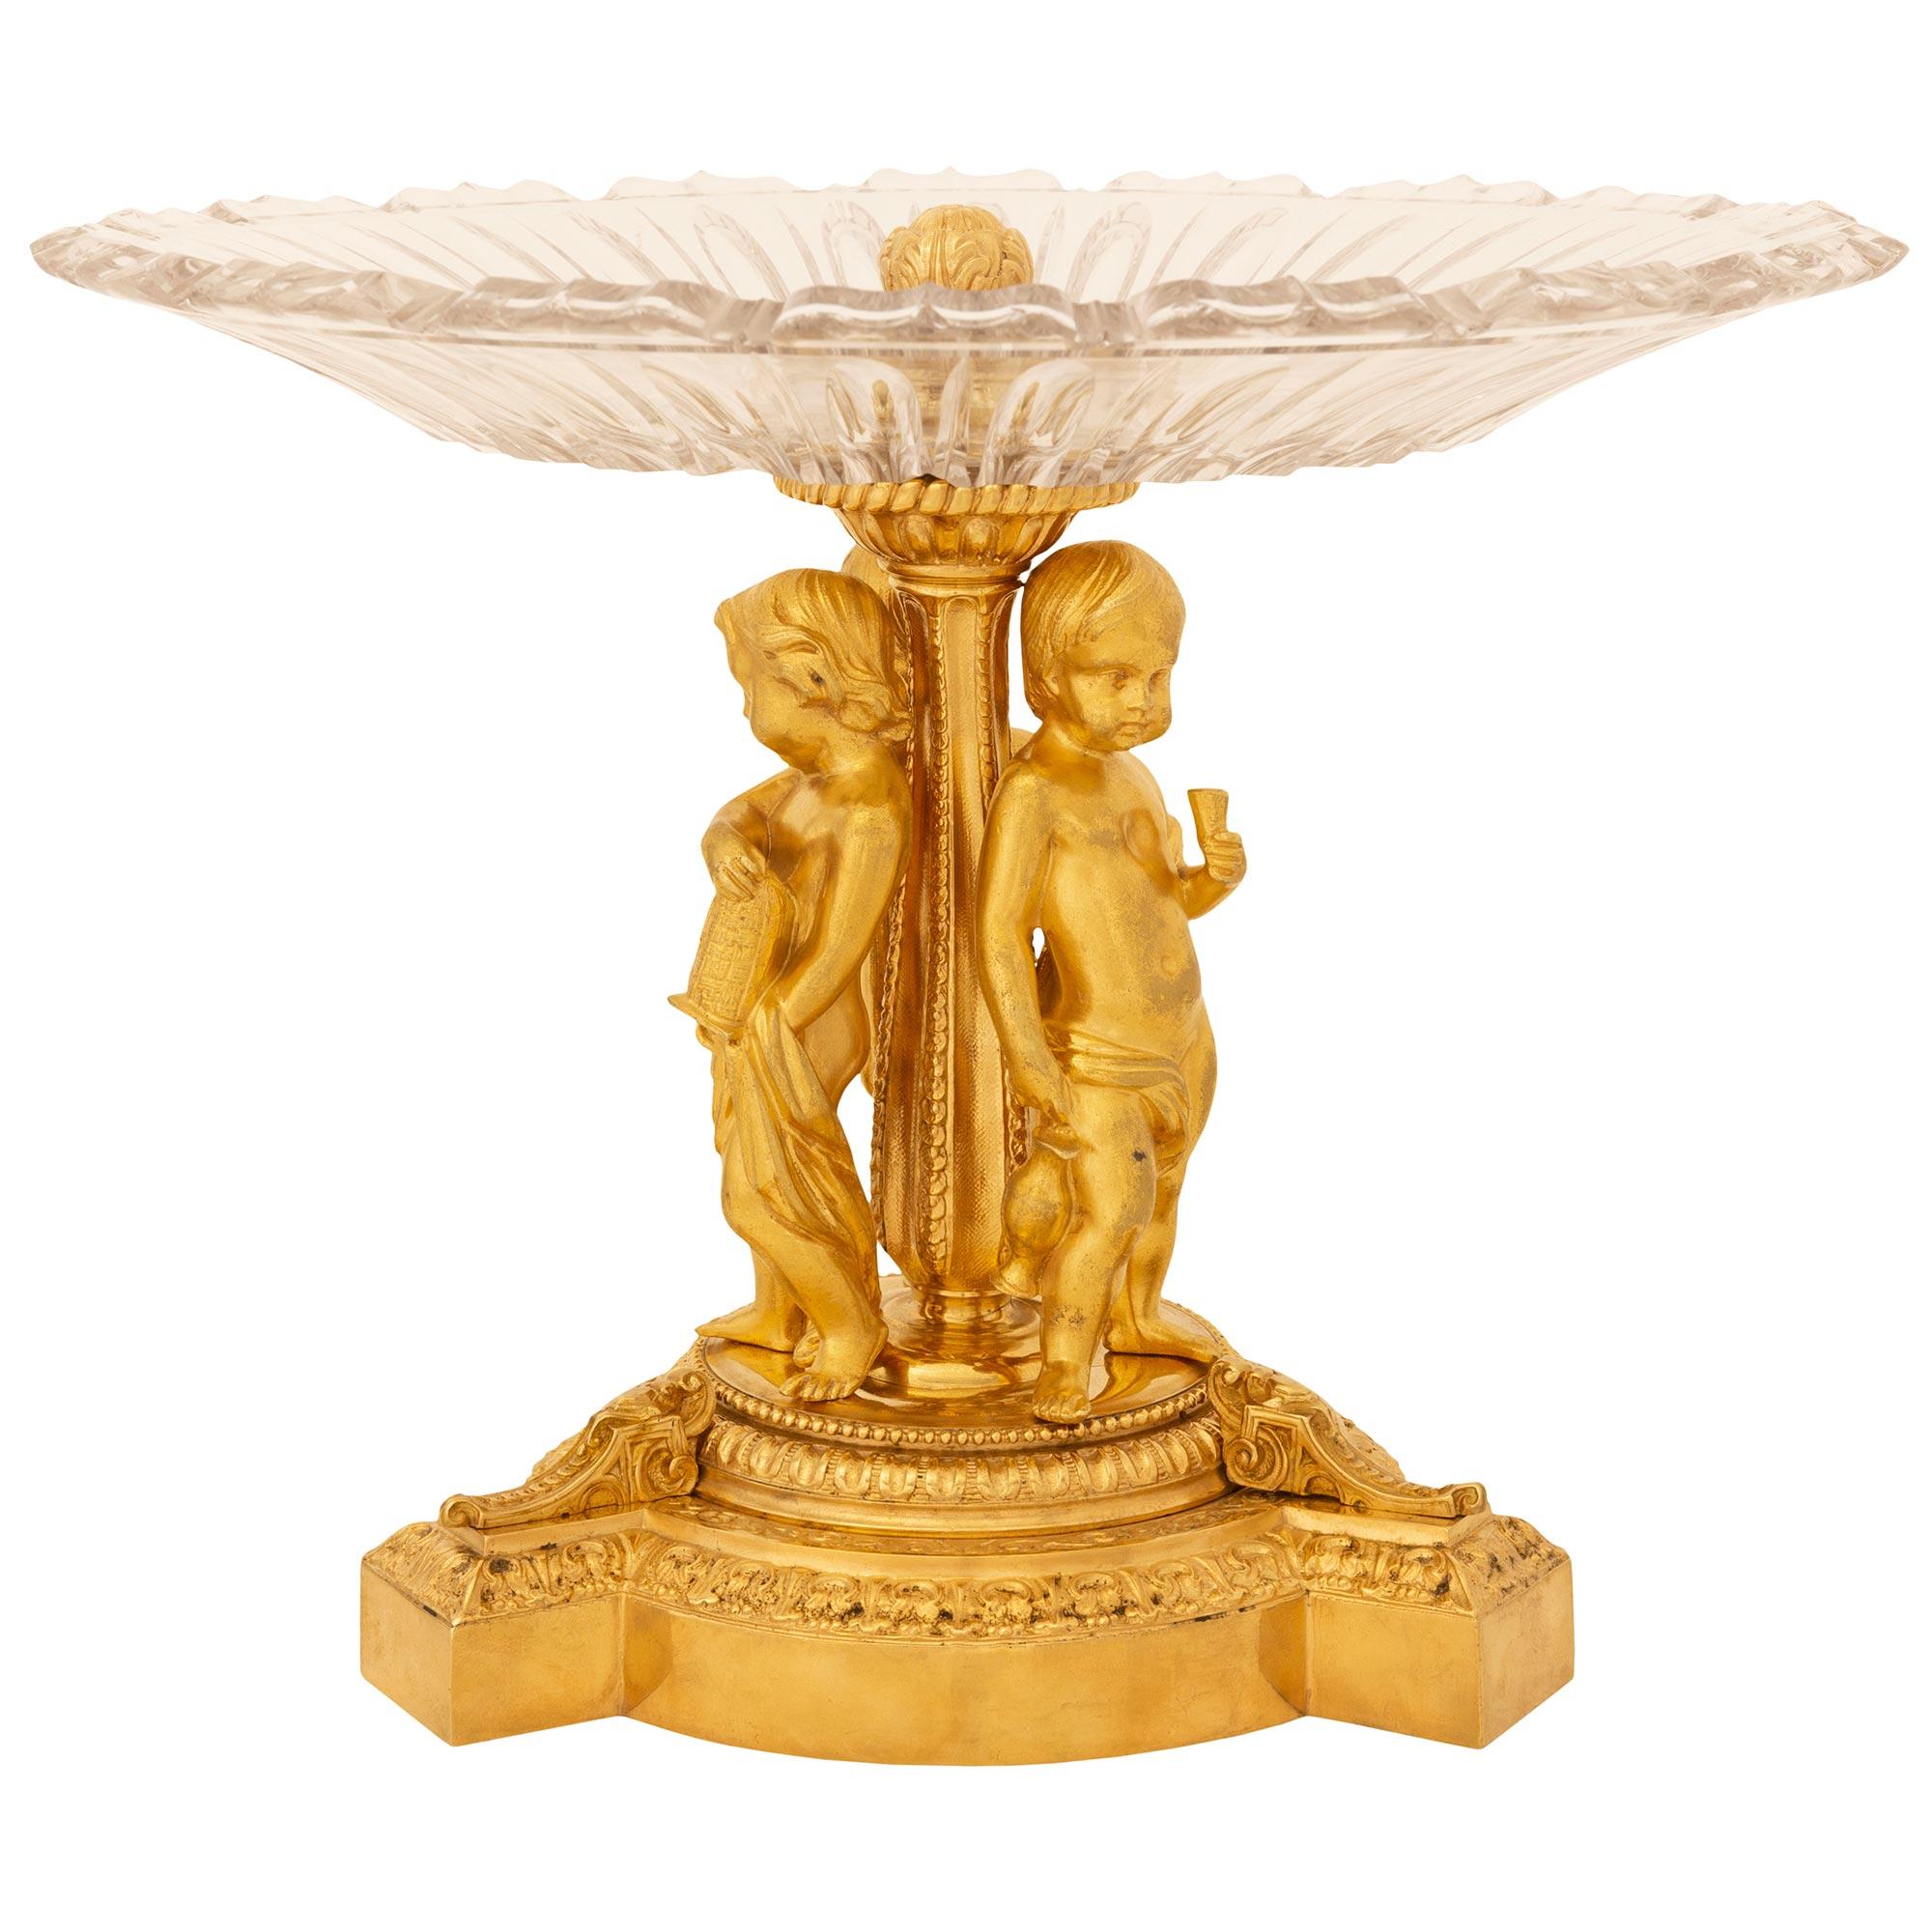 French 19th Century Belle Époque Period Ormolu and Baccarat Crystal Centerpiece In Good Condition For Sale In West Palm Beach, FL